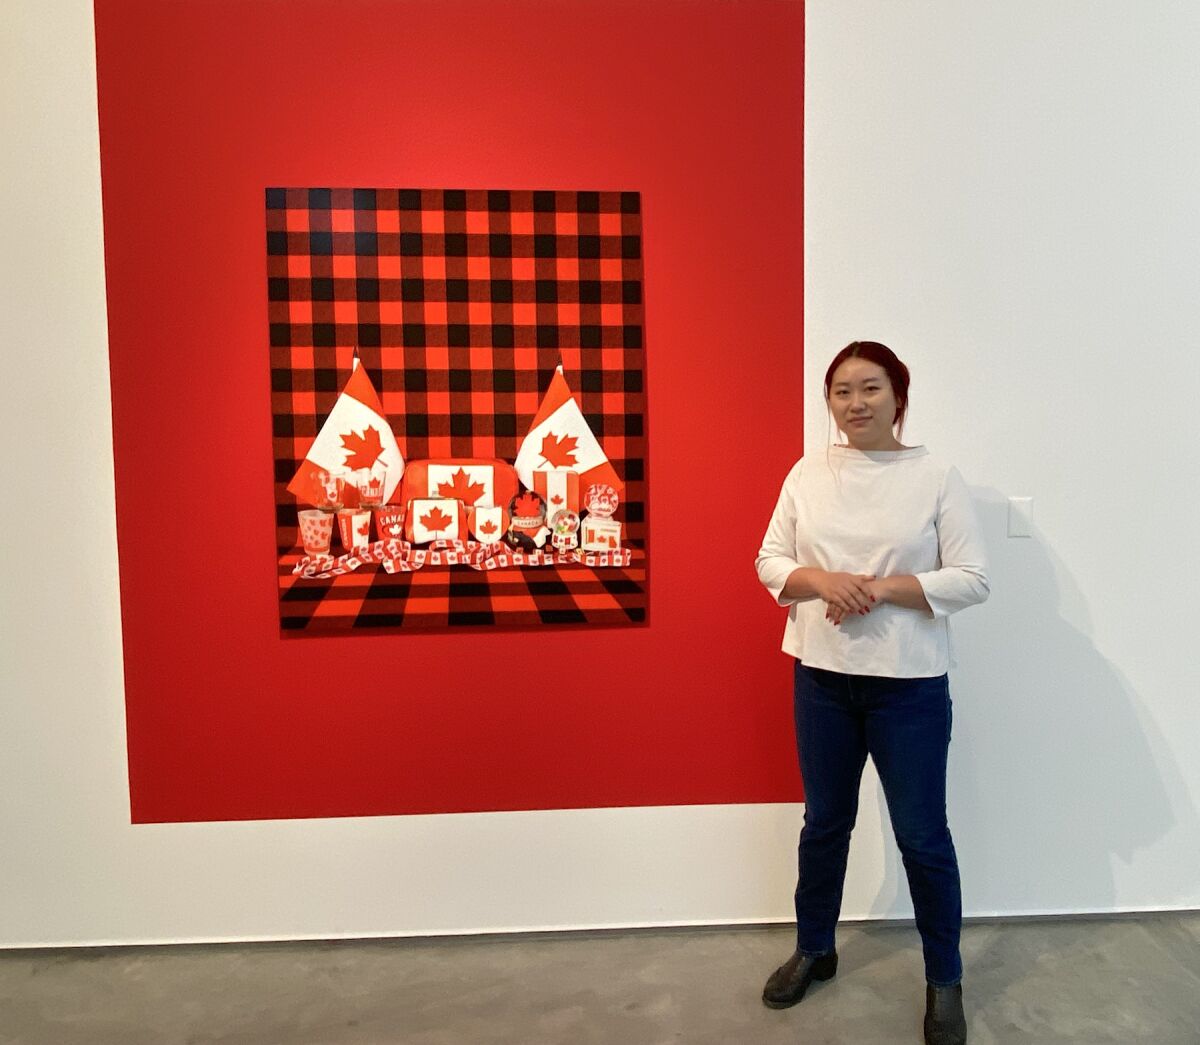 Artist Shellie Zhang with $76.30 (means of exchange) whose title is the cost of the assembled objects.